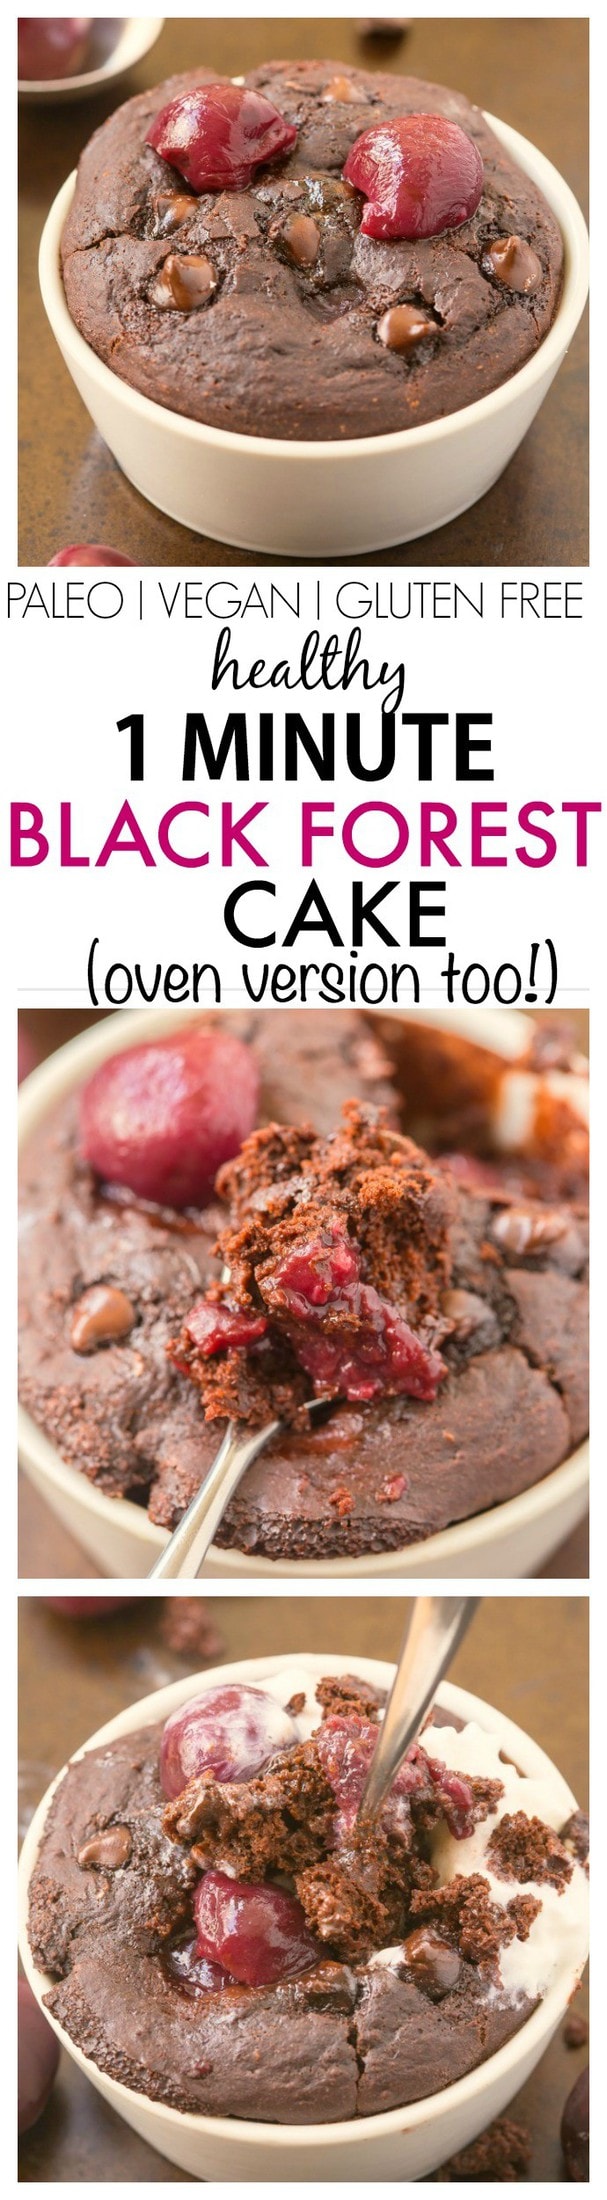 Healthy 1 Minute Black Forest Cake- Fluffy and light on the inside, tender on the outside- NO butter, oil, sugar or grains! but SO delicious! {vegan, gluten free, paleo recipe}- thebigmansworld.com